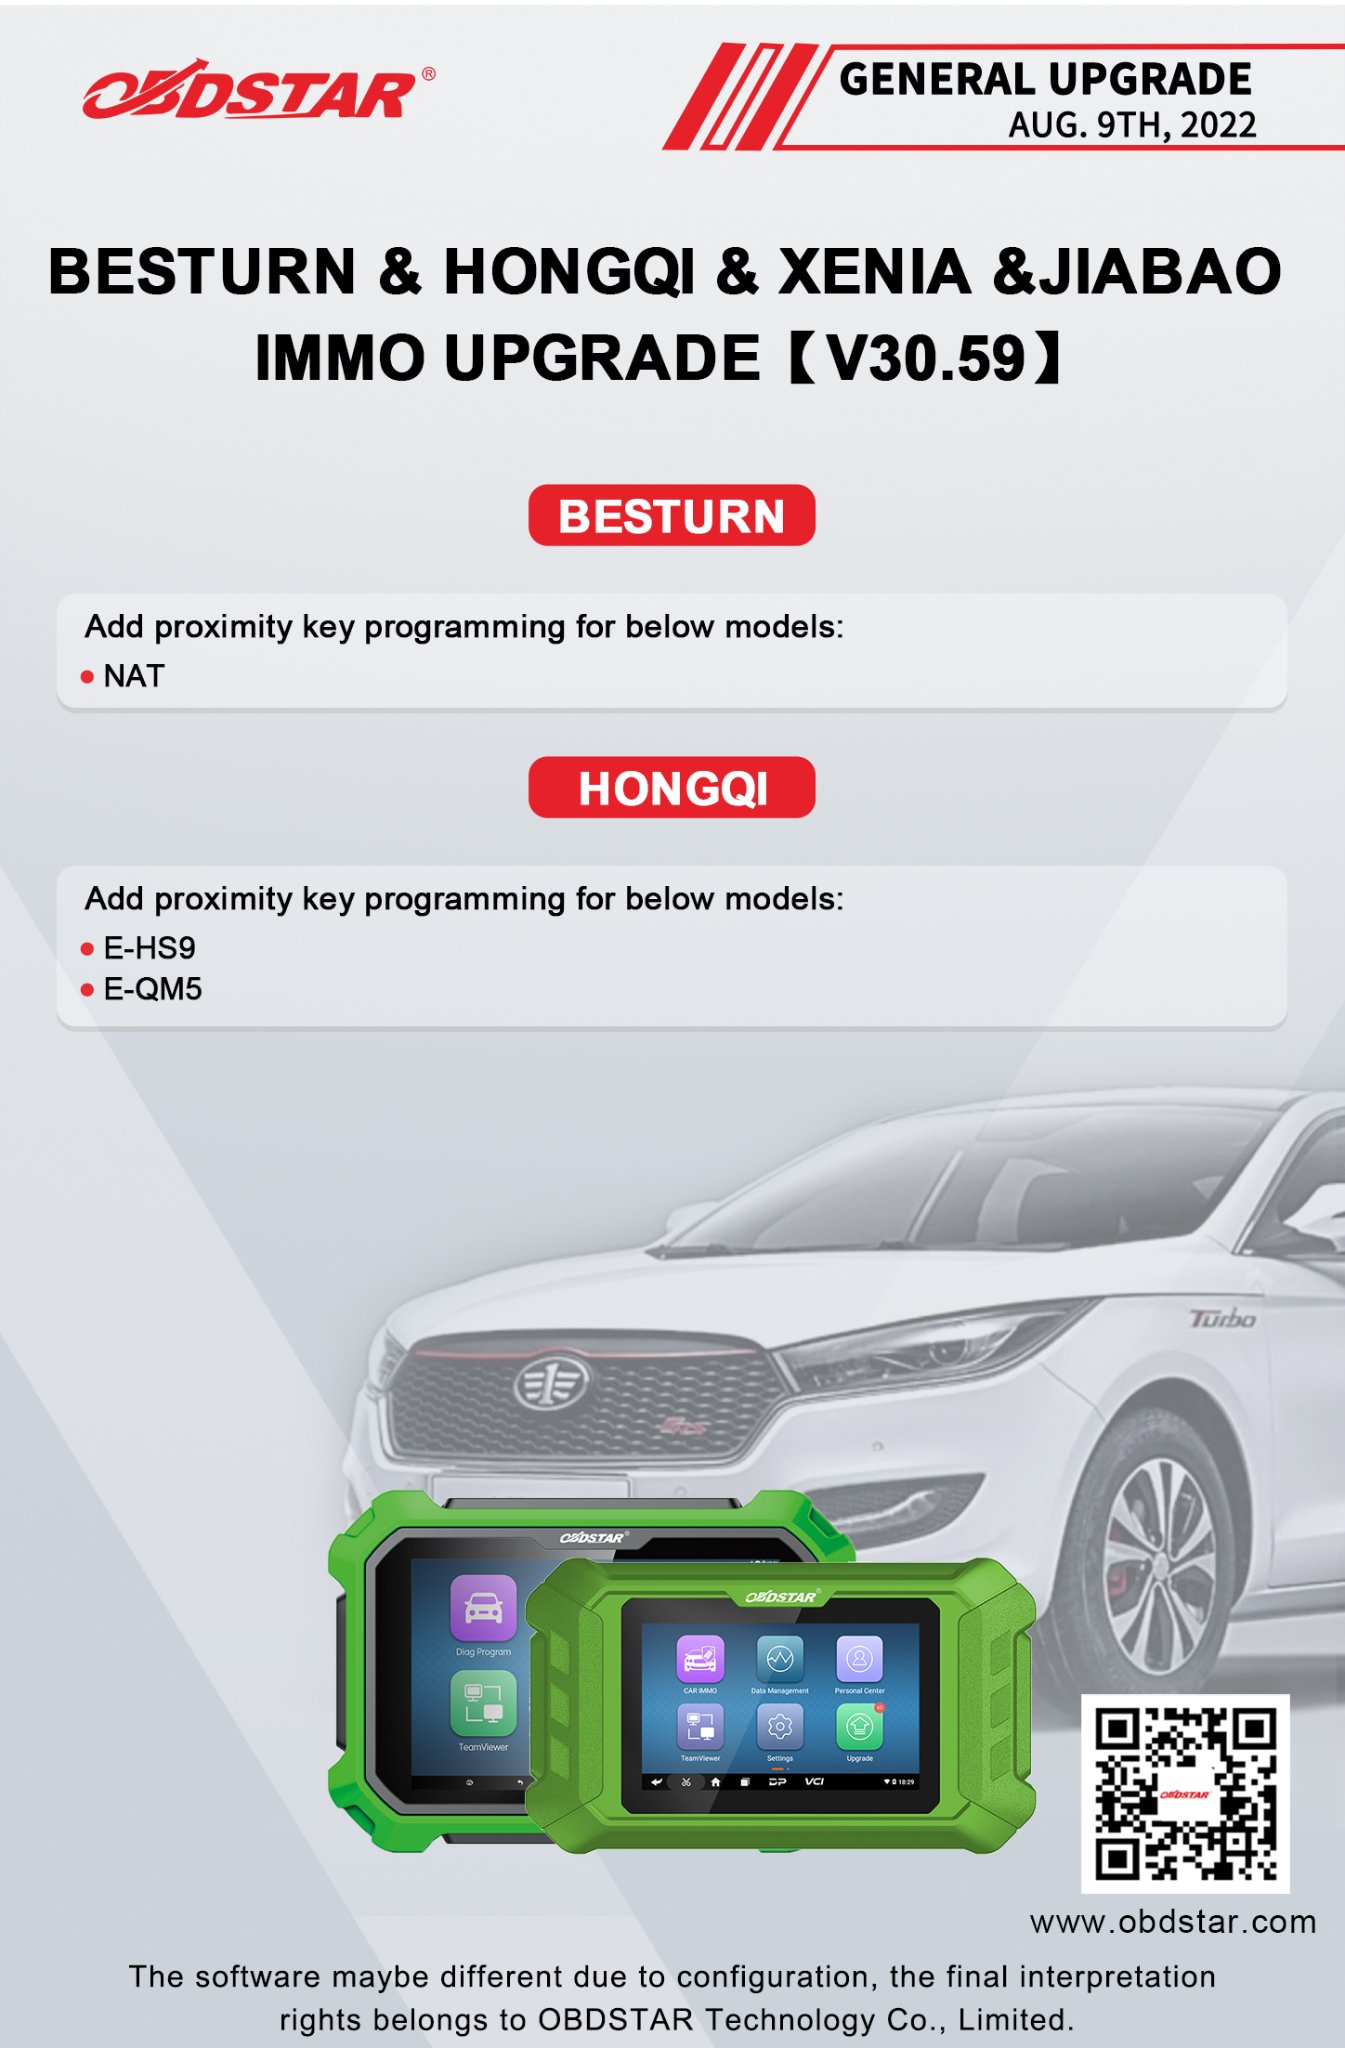 BESTURN & HONGQI & XENIA & JIABAO V30.59 IMMO Upgrade on OBDSTAR X300 DP Plus and X300 DP and X300 Pro4